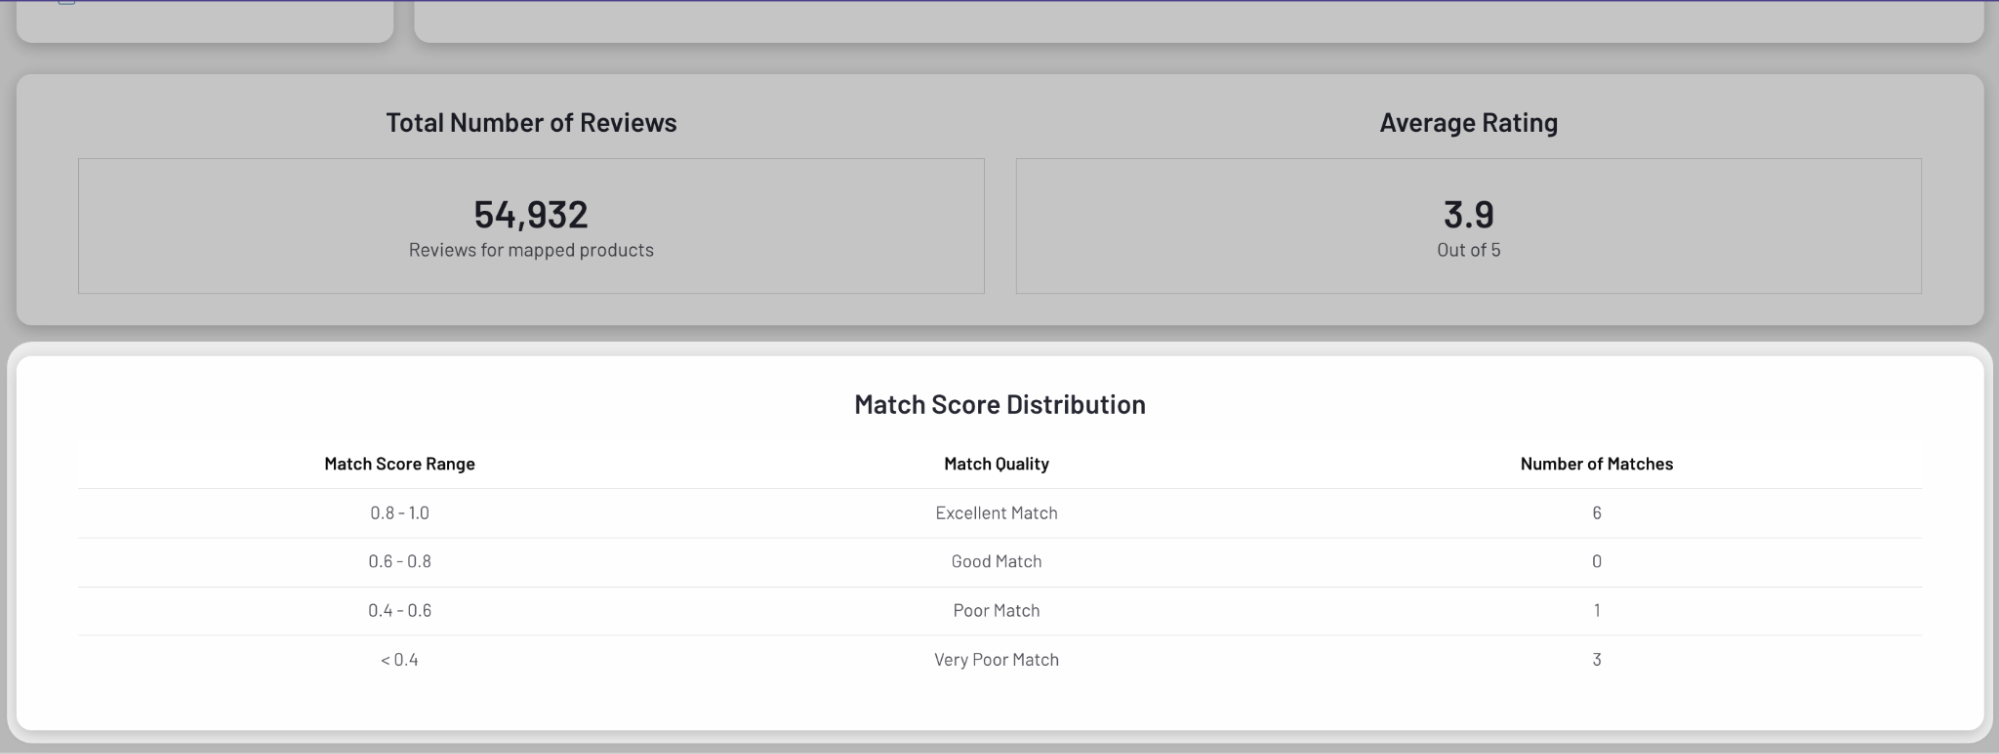 image of match score distribution table